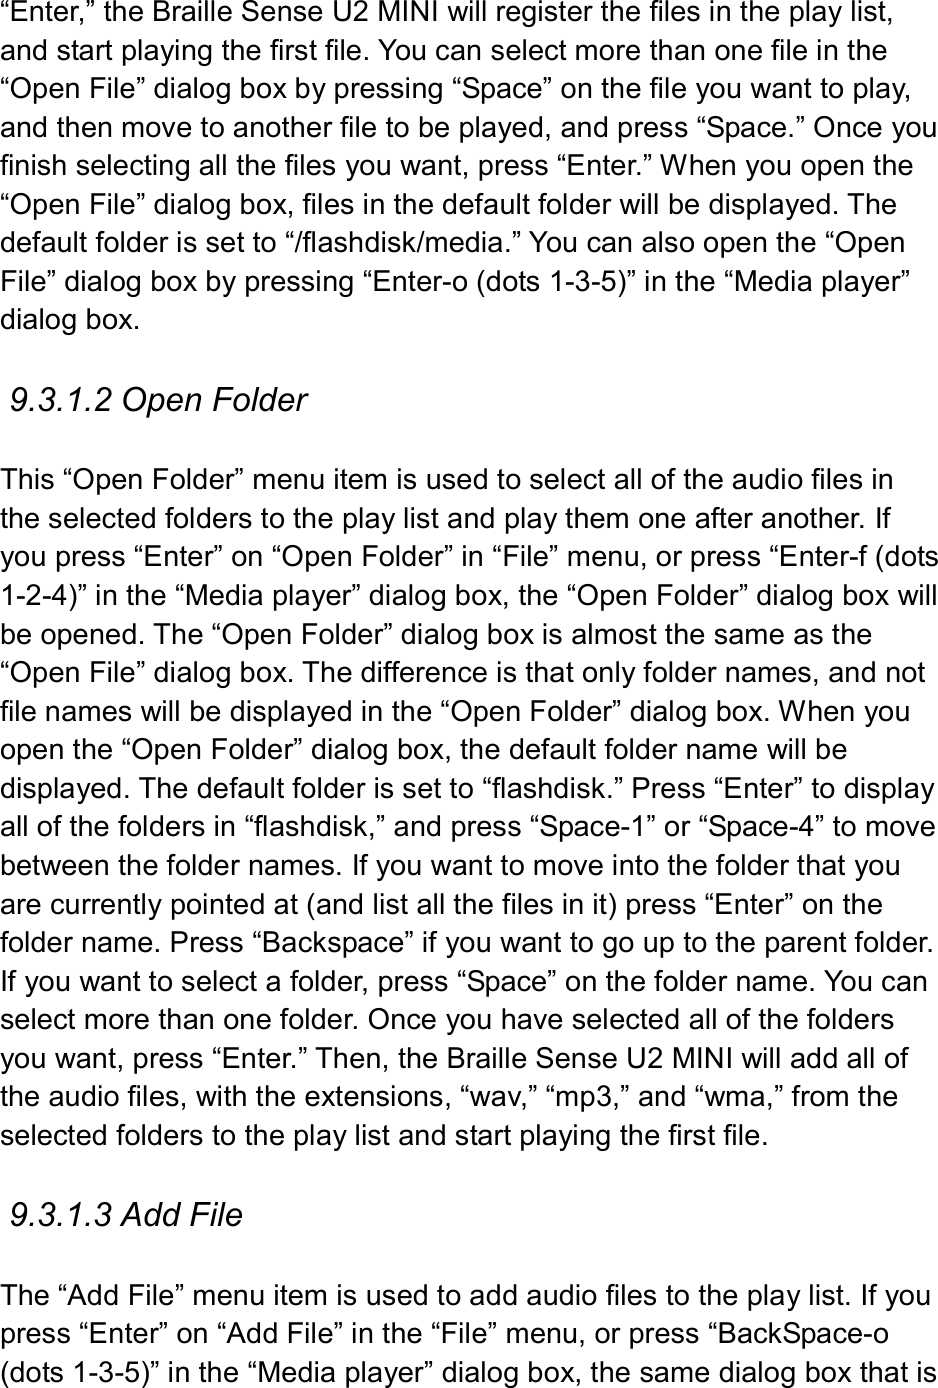  “Enter,” the Braille Sense U2 MINI will register the files in the play list, and start playing the first file. You can select more than one file in the “Open File” dialog box by pressing “Space” on the file you want to play, and then move to another file to be played, and press “Space.” Once you finish selecting all the files you want, press “Enter.” When you open the “Open File” dialog box, files in the default folder will be displayed. The default folder is set to “/flashdisk/media.” You can also open the “Open File” dialog box by pressing “Enter-o (dots 1-3-5)” in the “Media player” dialog box.  9.3.1.2 Open Folder  This “Open Folder” menu item is used to select all of the audio files in the selected folders to the play list and play them one after another. If you press “Enter” on “Open Folder” in “File” menu, or press “Enter-f (dots 1-2-4)” in the “Media player” dialog box, the “Open Folder” dialog box will be opened. The “Open Folder” dialog box is almost the same as the “Open File” dialog box. The difference is that only folder names, and not file names will be displayed in the “Open Folder” dialog box. When you open the “Open Folder” dialog box, the default folder name will be displayed. The default folder is set to “flashdisk.” Press “Enter” to display all of the folders in “flashdisk,” and press “Space-1” or “Space-4” to move between the folder names. If you want to move into the folder that you are currently pointed at (and list all the files in it) press “Enter” on the folder name. Press “Backspace” if you want to go up to the parent folder. If you want to select a folder, press “Space” on the folder name. You can select more than one folder. Once you have selected all of the folders you want, press “Enter.” Then, the Braille Sense U2 MINI will add all of the audio files, with the extensions, “wav,” “mp3,” and “wma,” from the selected folders to the play list and start playing the first file.  9.3.1.3 Add File  The “Add File” menu item is used to add audio files to the play list. If you press “Enter” on “Add File” in the “File” menu, or press “BackSpace-o (dots 1-3-5)” in the “Media player” dialog box, the same dialog box that is 